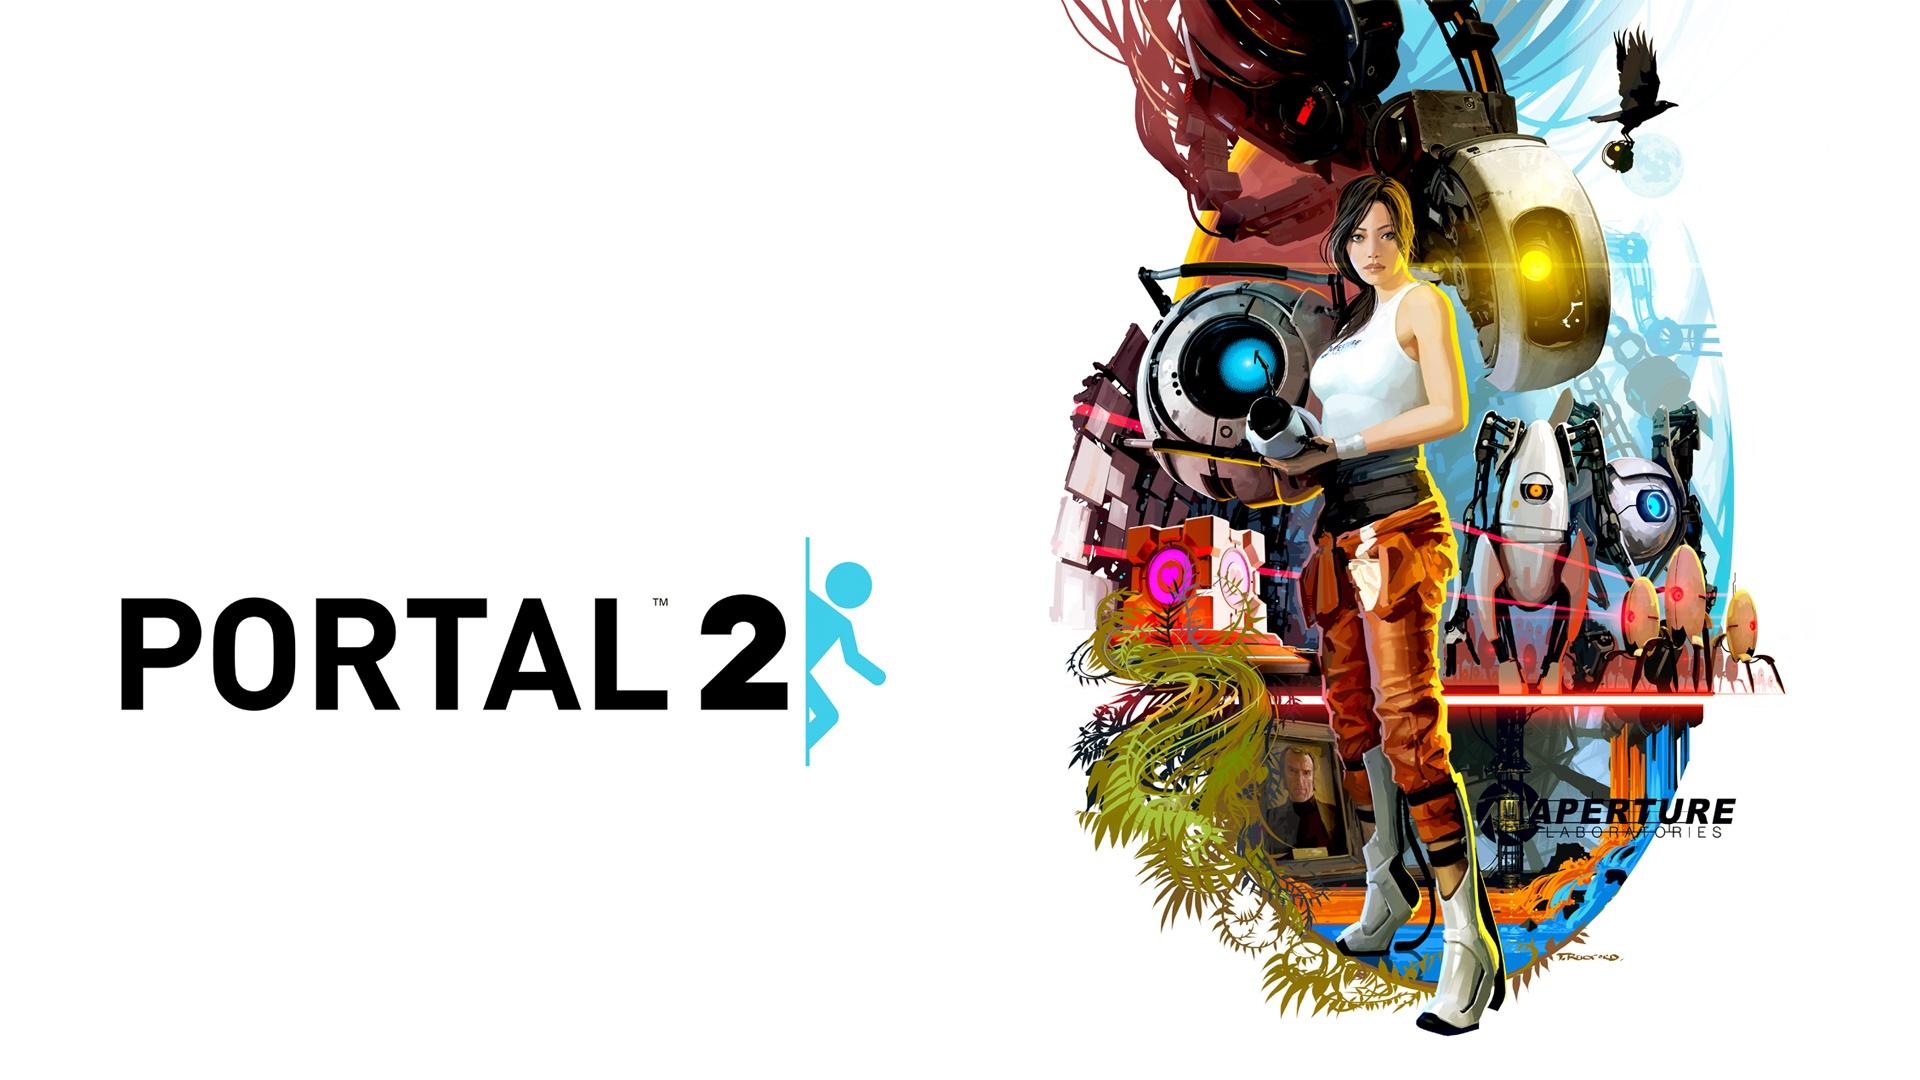 Portal 2 Characters Wallpaper in jpg format for free download